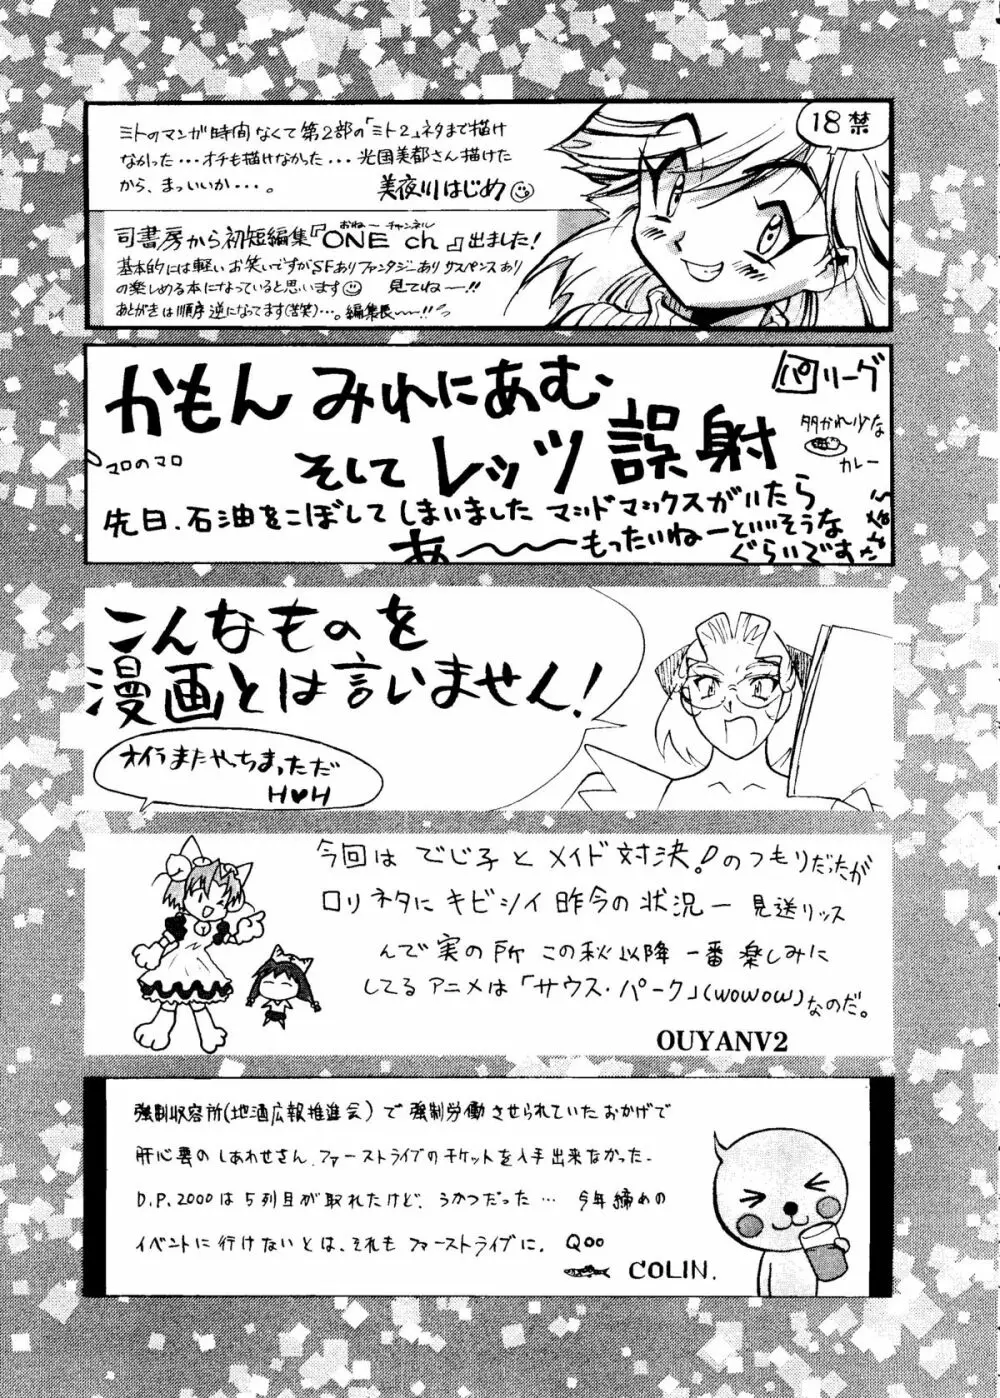 BUY or DIE おかちめんたいこ Page.95